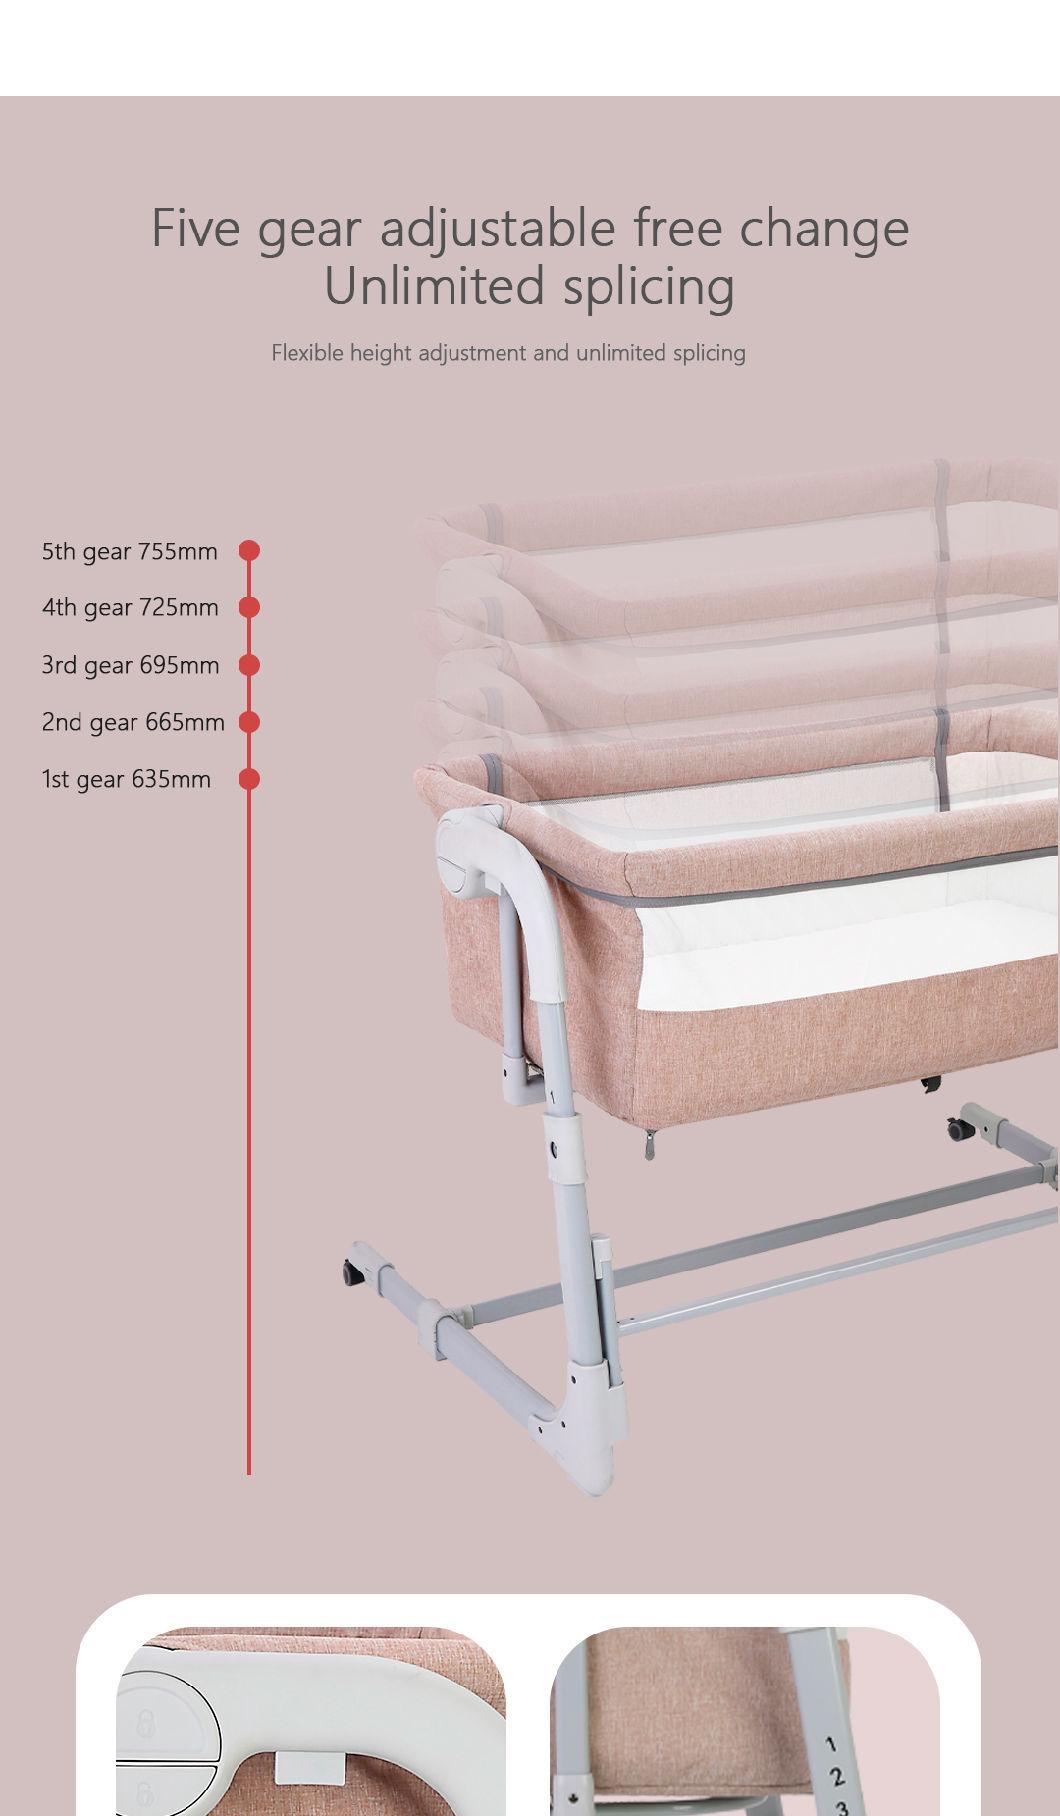 Safe and Practical Crib Cot Baby Bed with CCC Good Production Line